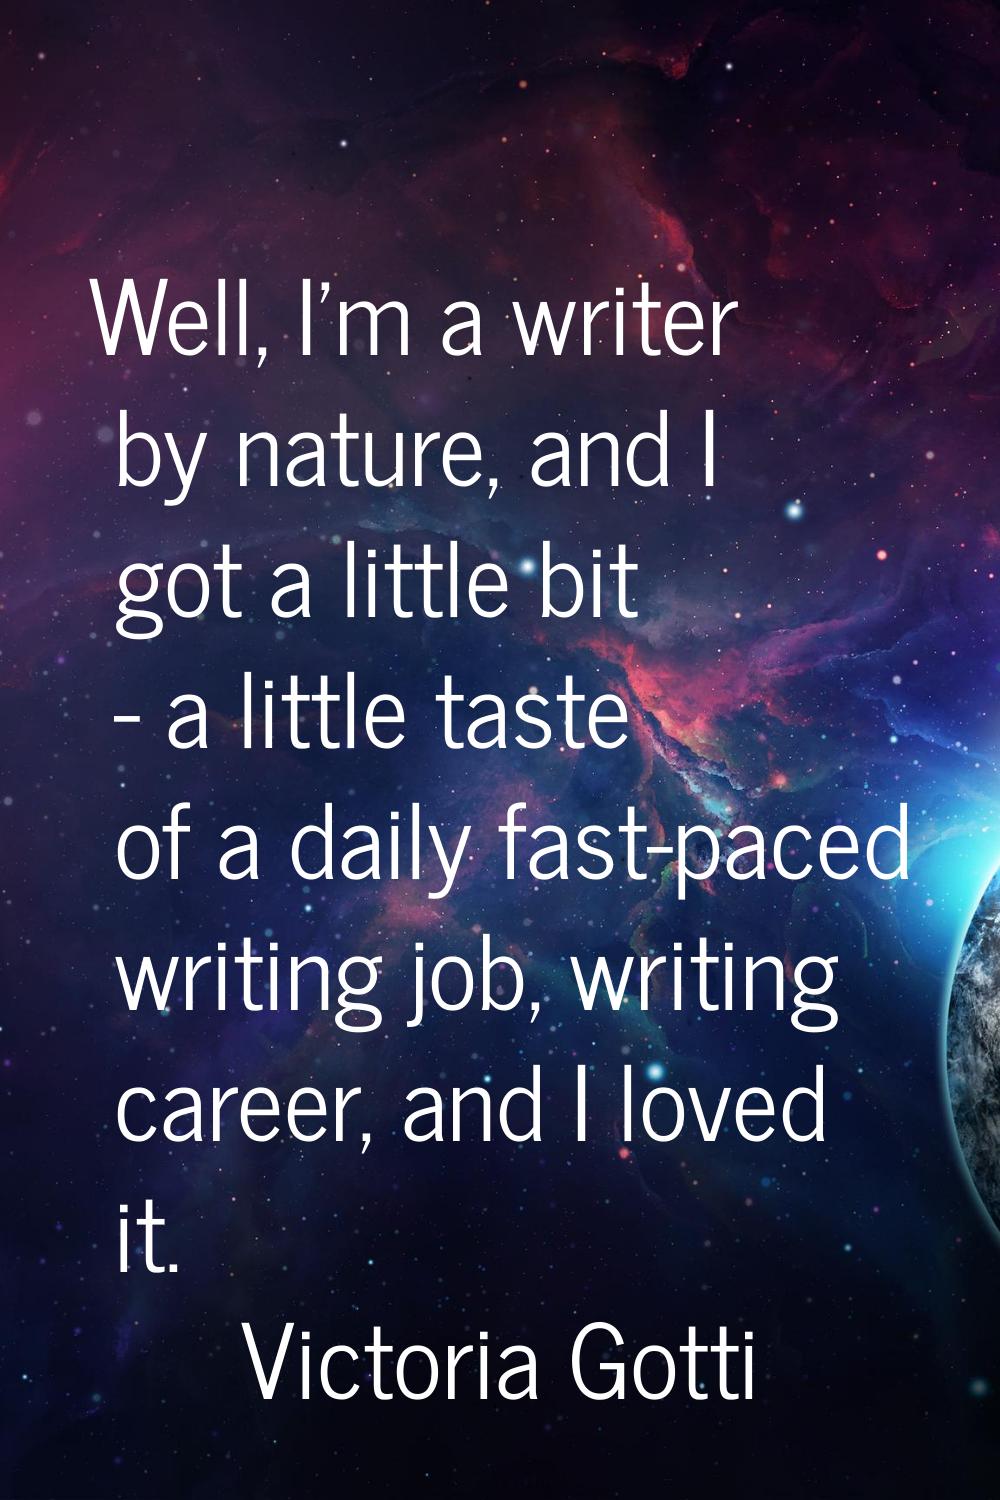 Well, I'm a writer by nature, and I got a little bit - a little taste of a daily fast-paced writing